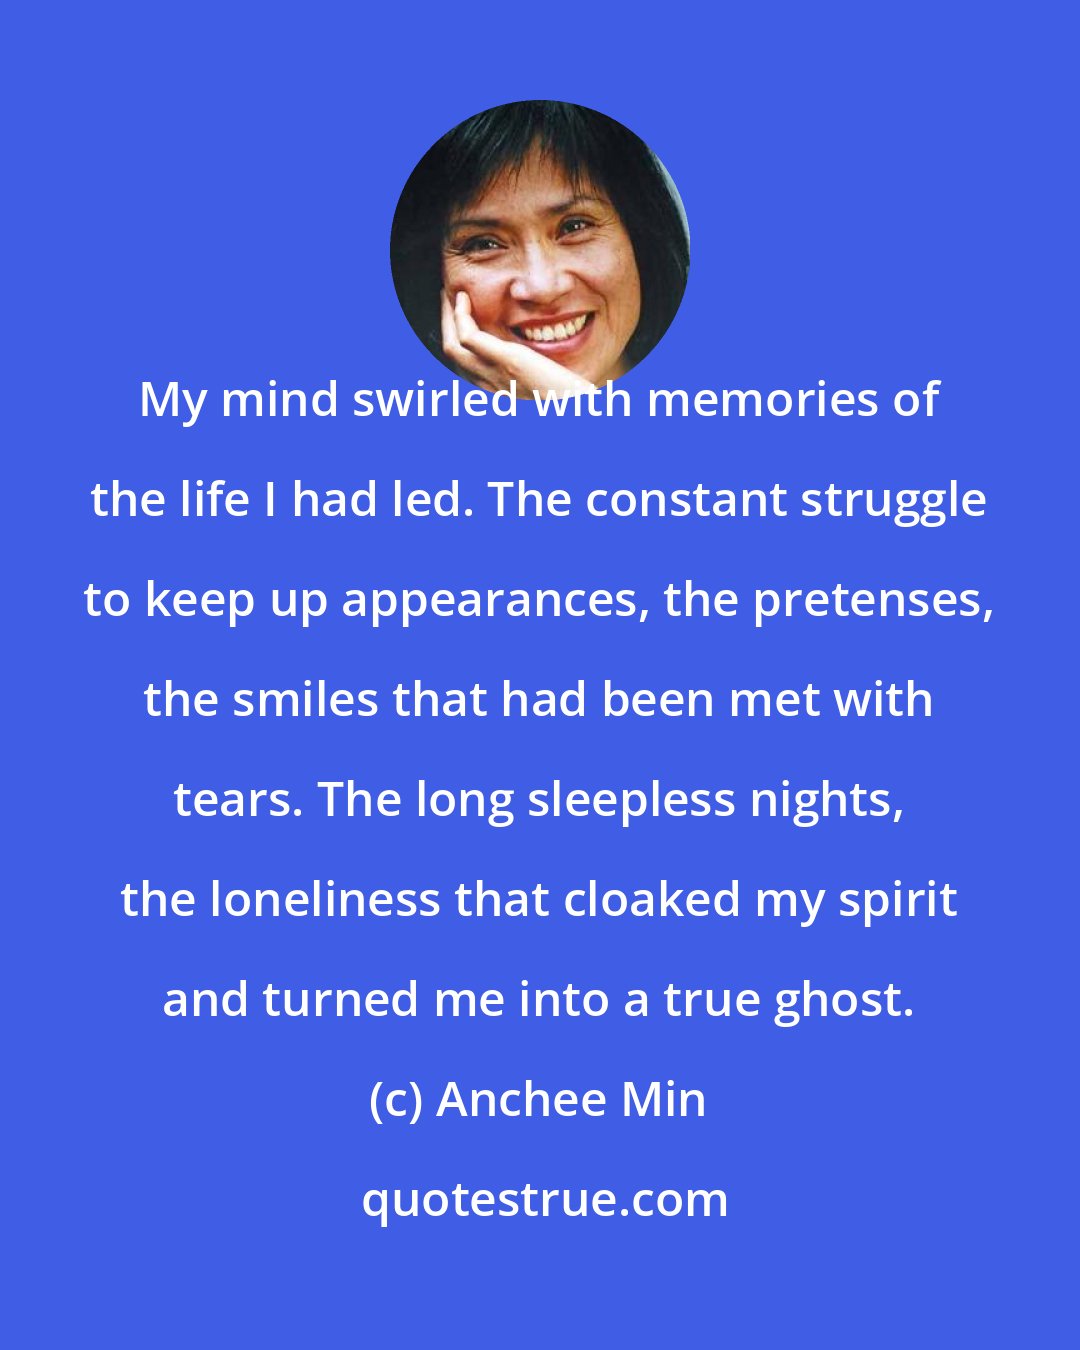 Anchee Min: My mind swirled with memories of the life I had led. The constant struggle to keep up appearances, the pretenses, the smiles that had been met with tears. The long sleepless nights, the loneliness that cloaked my spirit and turned me into a true ghost.